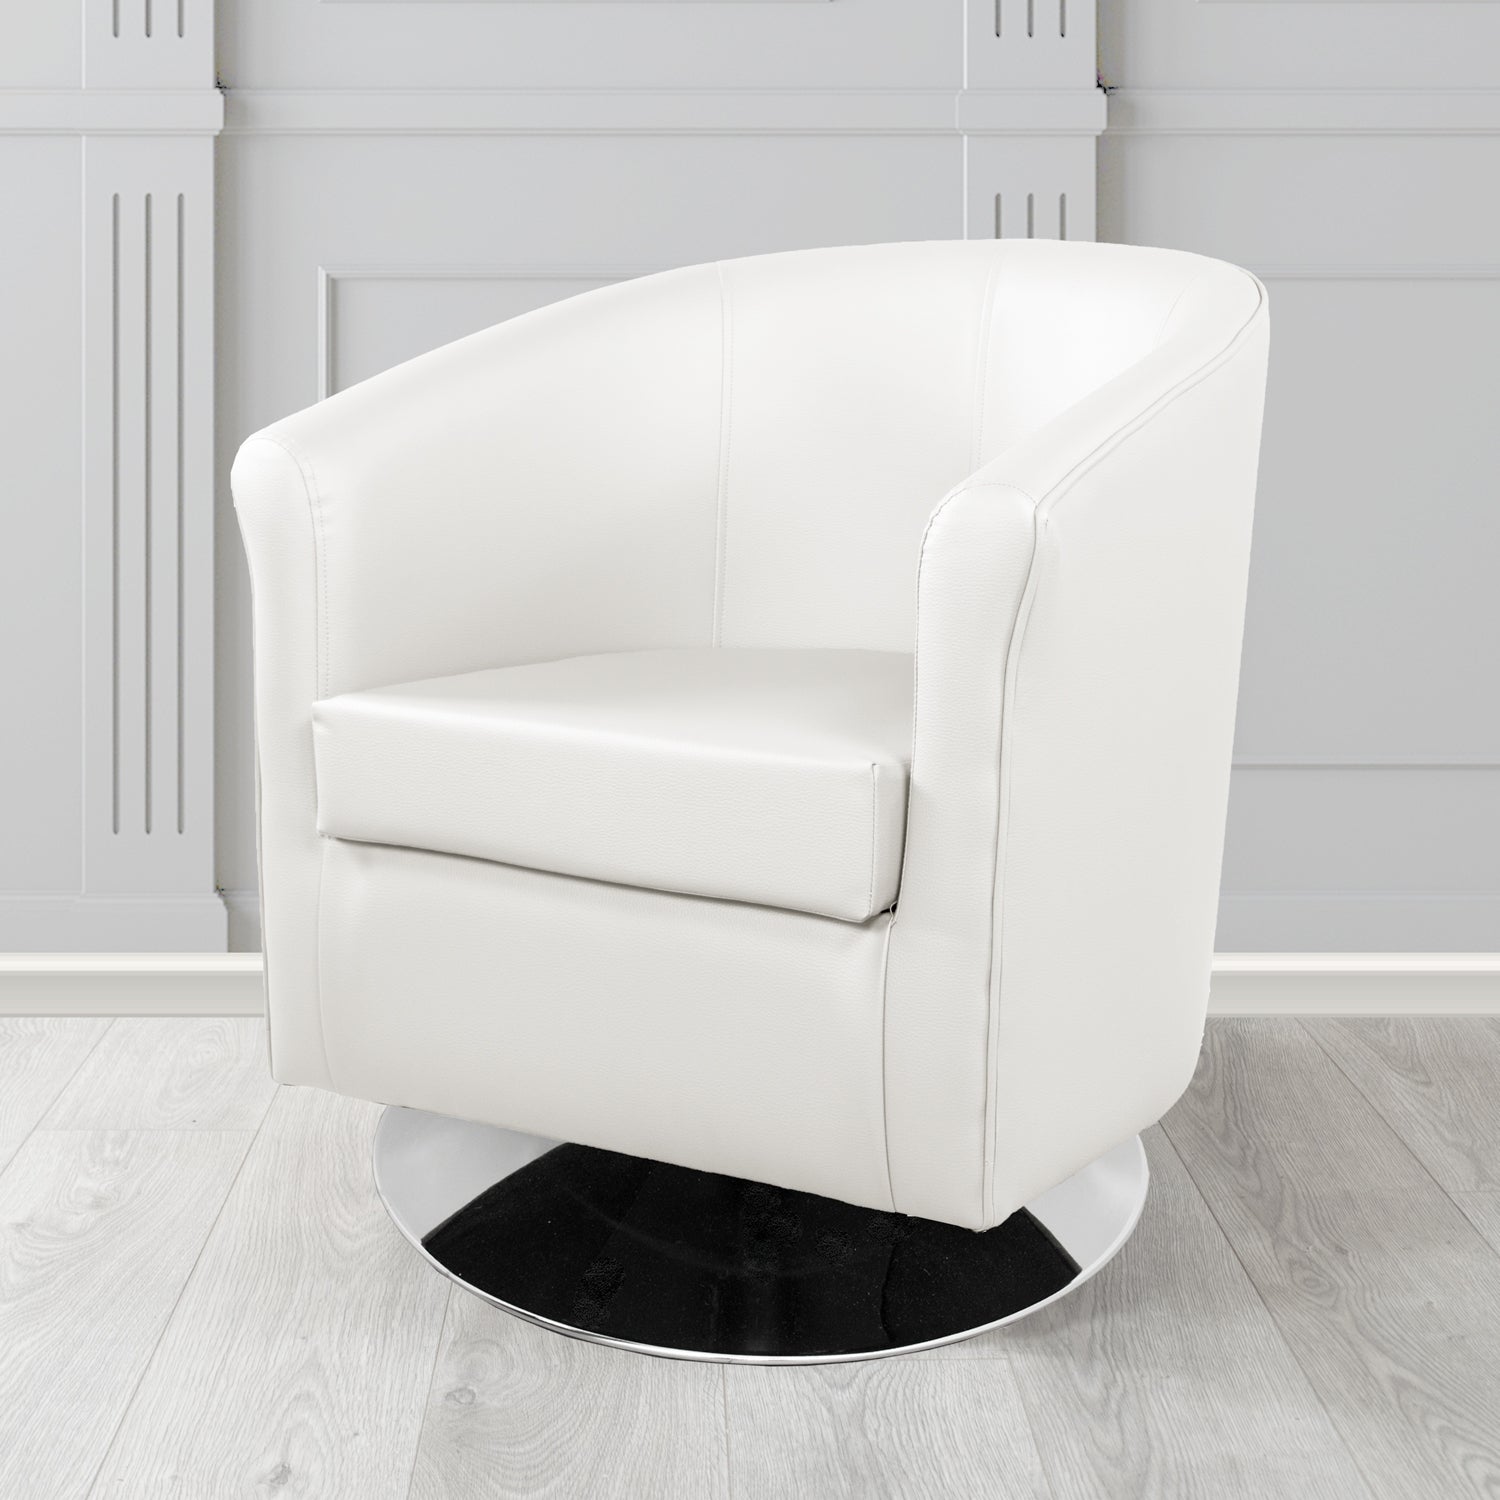 Tuscany Swivel Tub Chair in Madrid White Faux Leather - The Tub Chair Shop